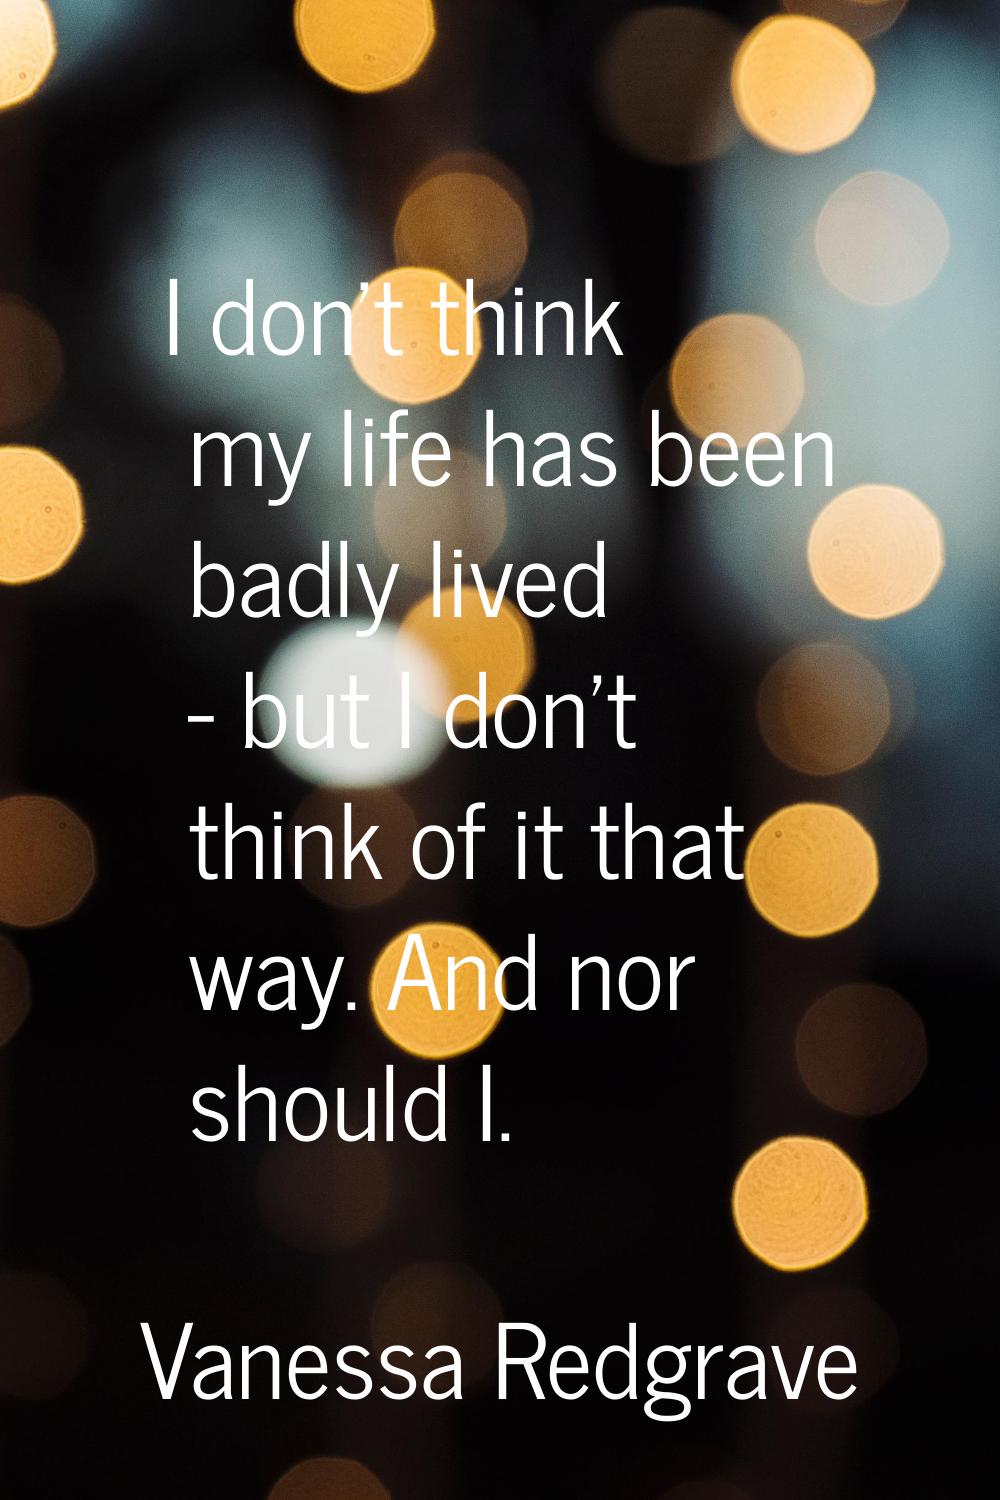 I don't think my life has been badly lived - but I don't think of it that way. And nor should I.